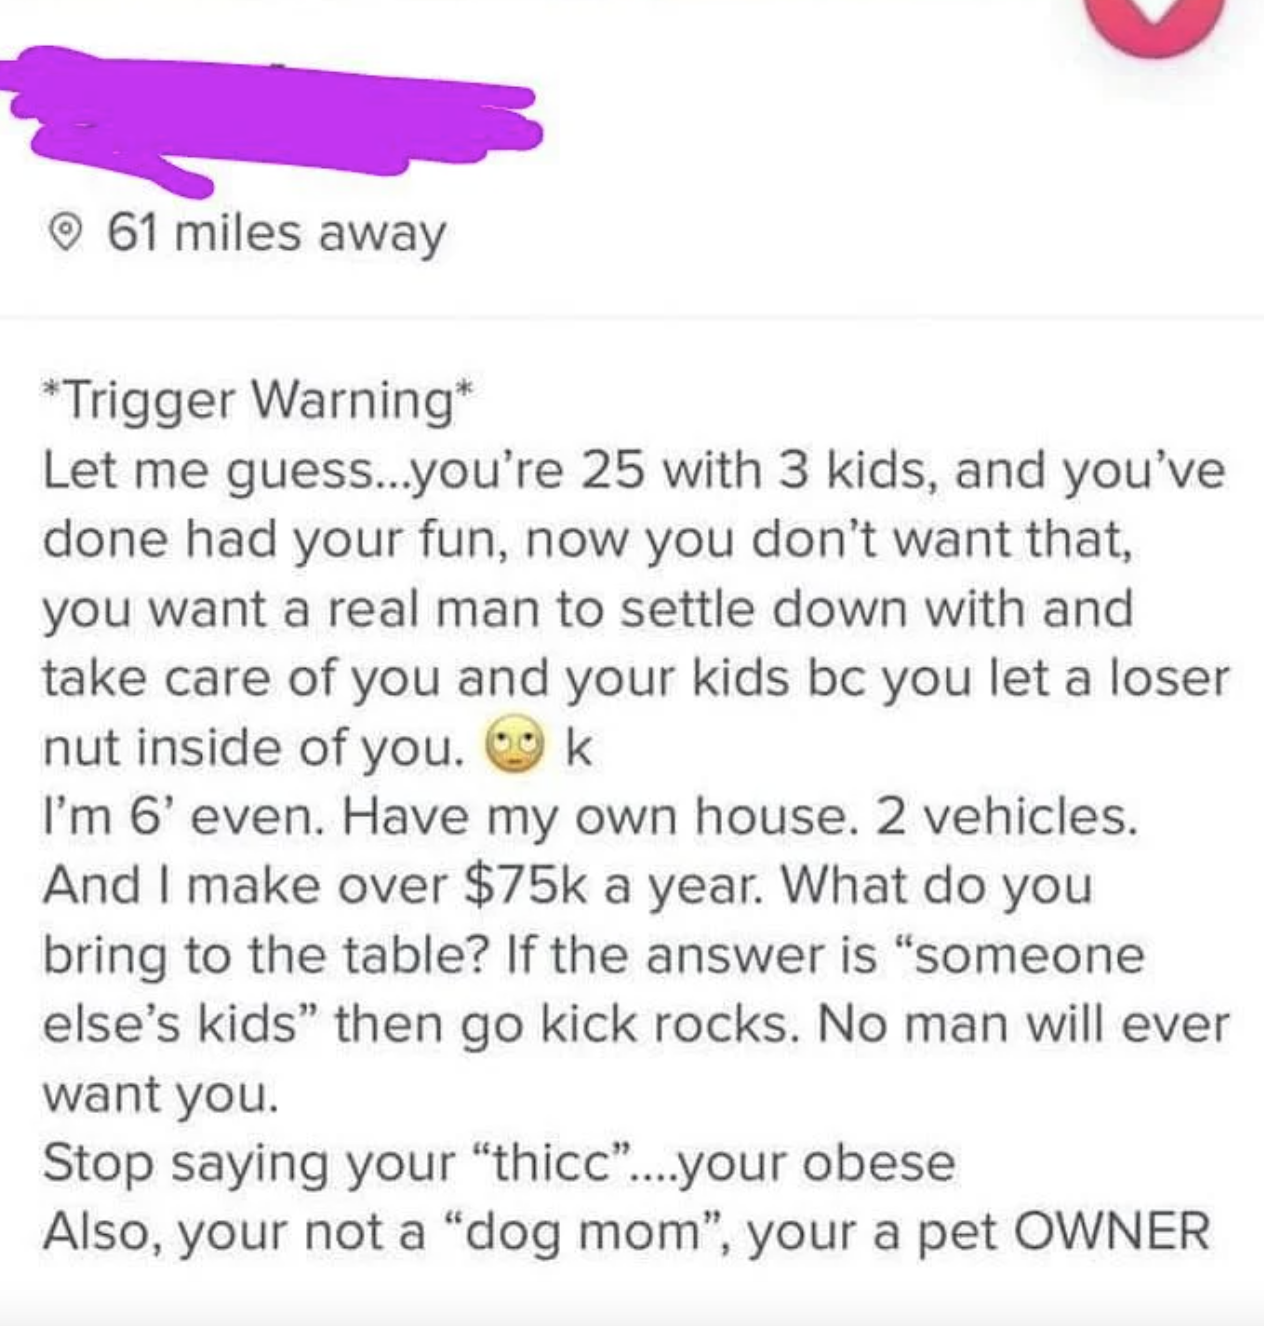 Dating profile that reads: &quot;Stop saying your &#x27;thicc&#x27;...your obese&quot;